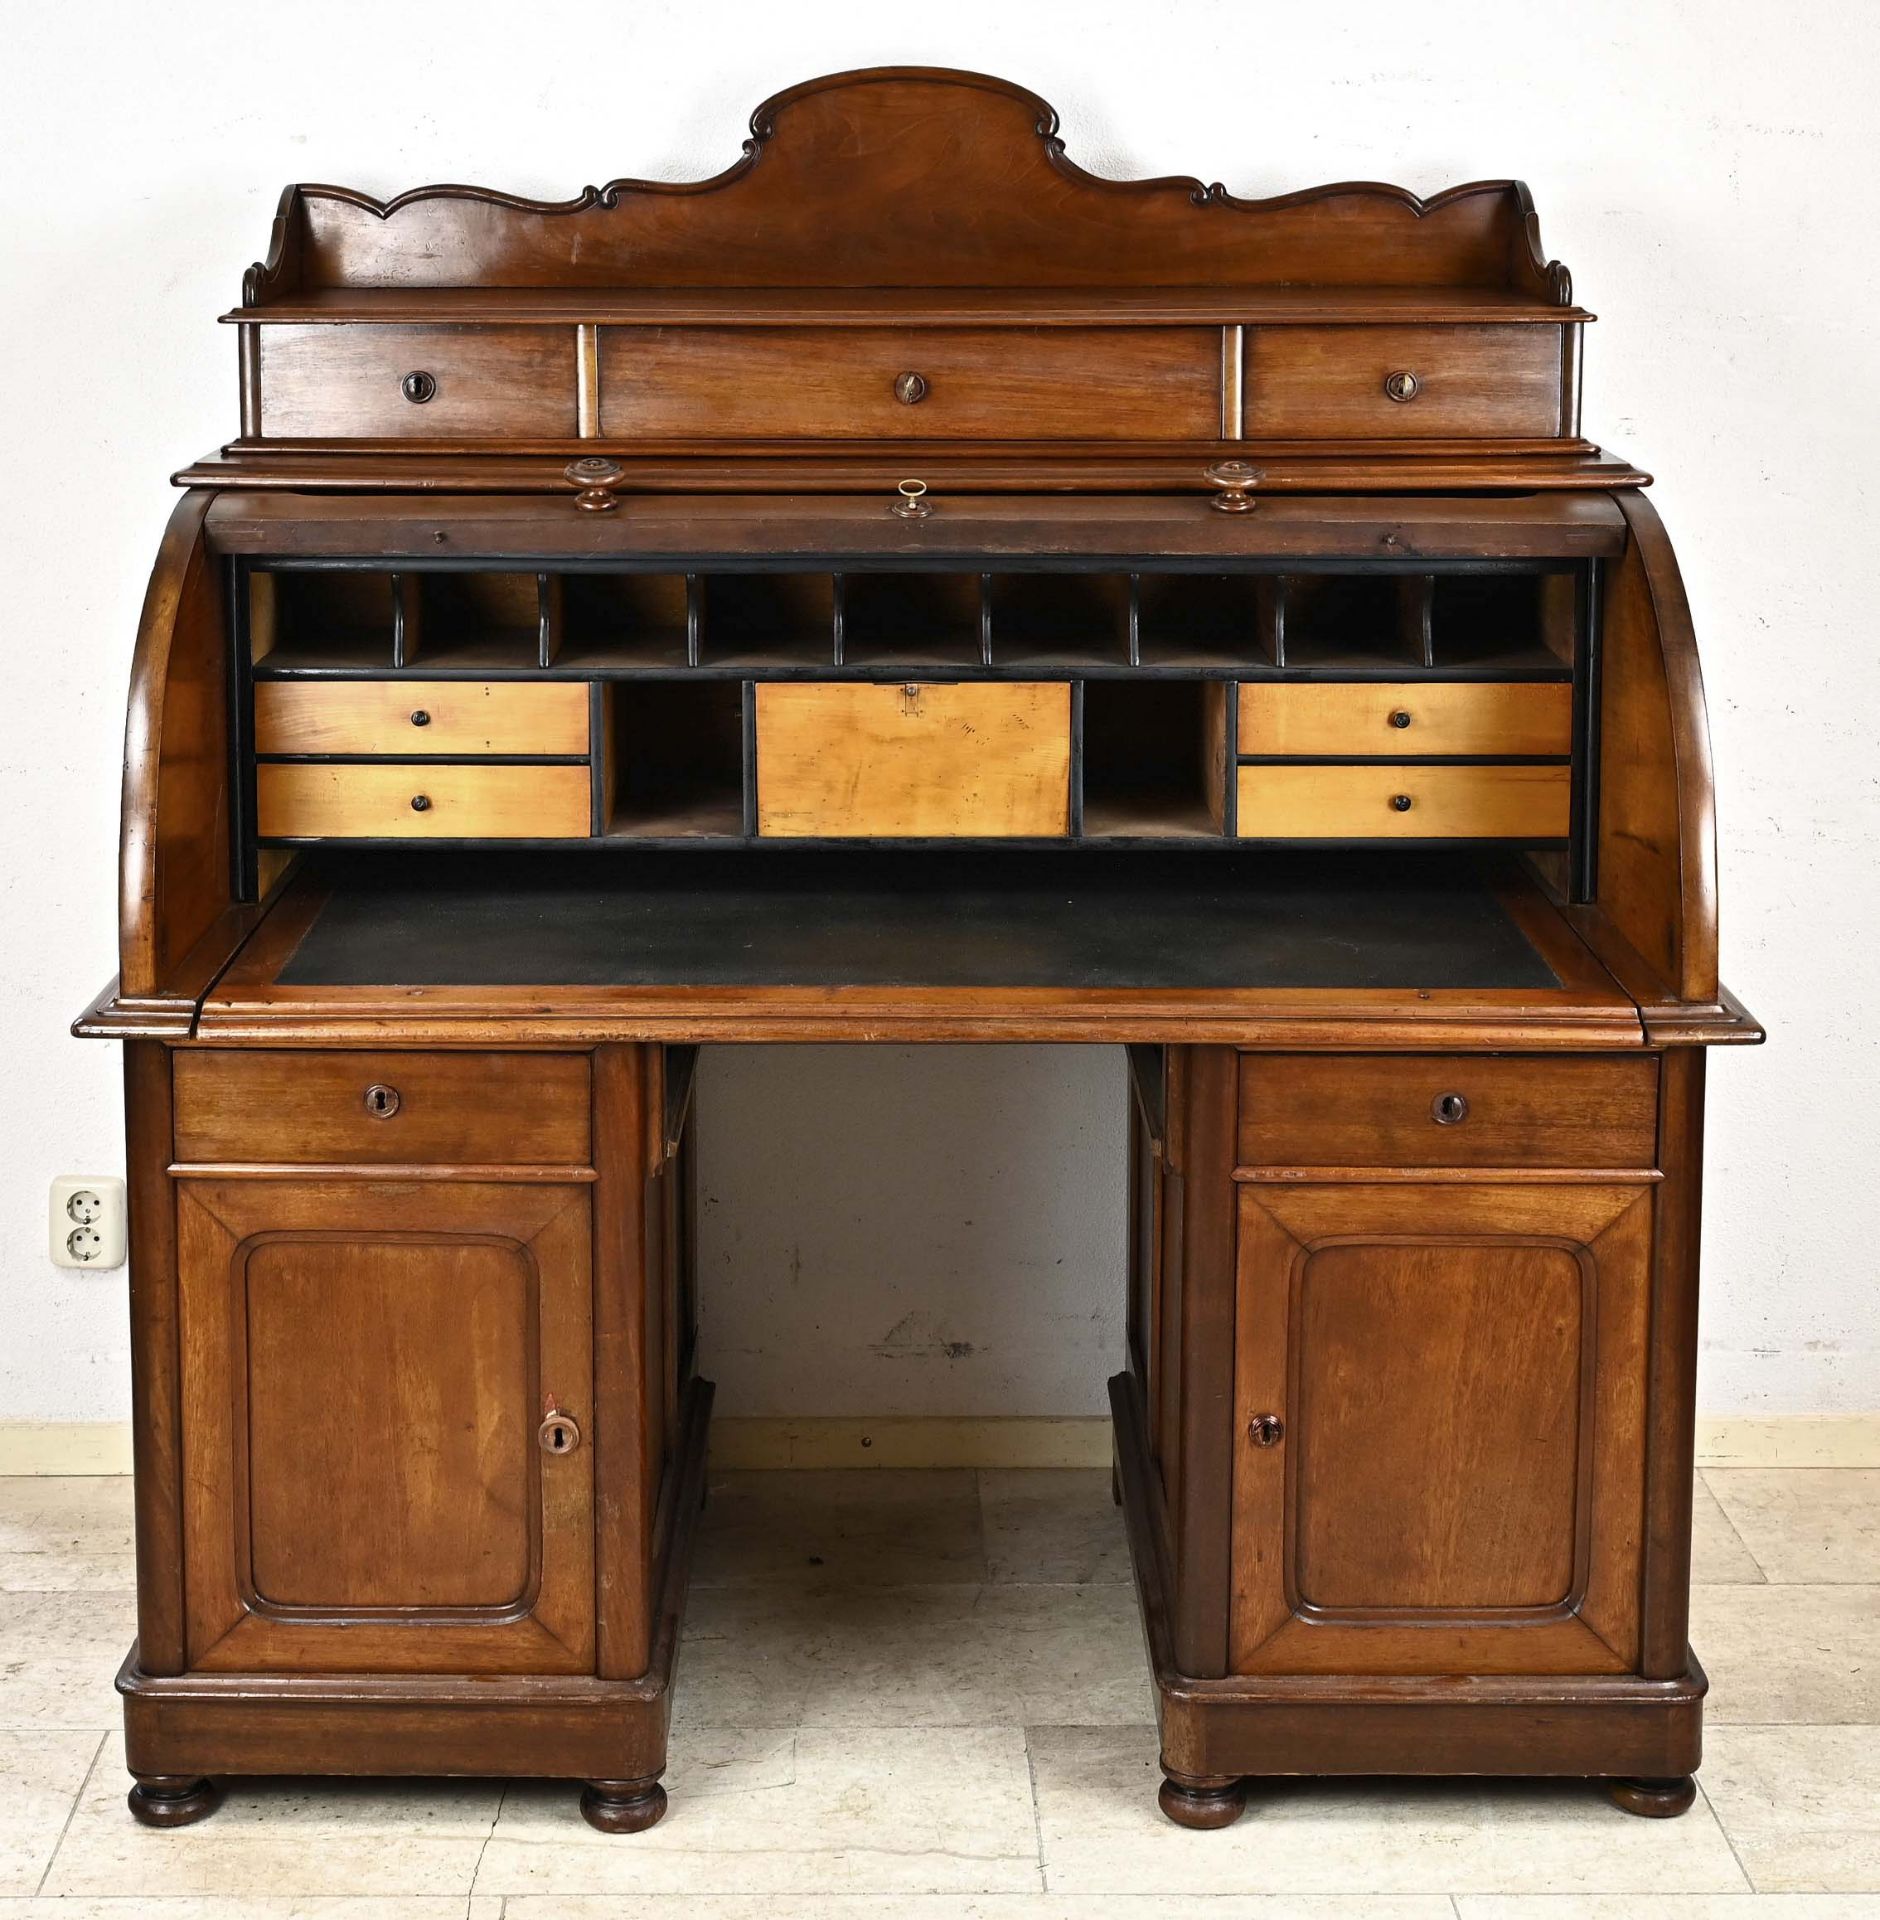 Roll bureau from around 1860, mahogany, can be dismantled, 155 x 145 x 78 cm - This furniture cannot